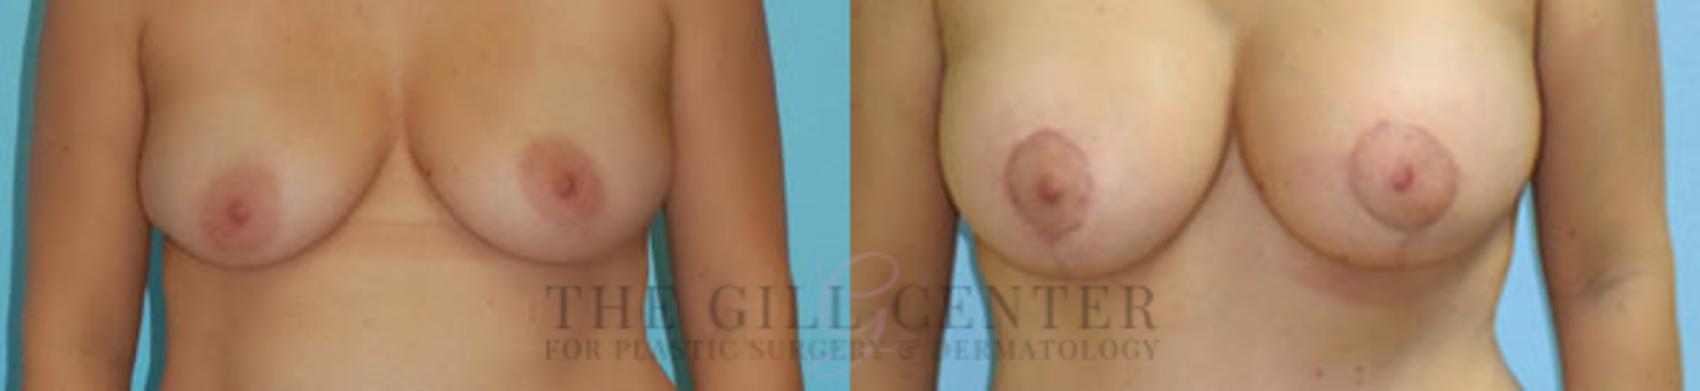 Breast Lift with Implants Case 119 Before & After Front | The Woodlands, TX | The Gill Center for Plastic Surgery and Dermatology